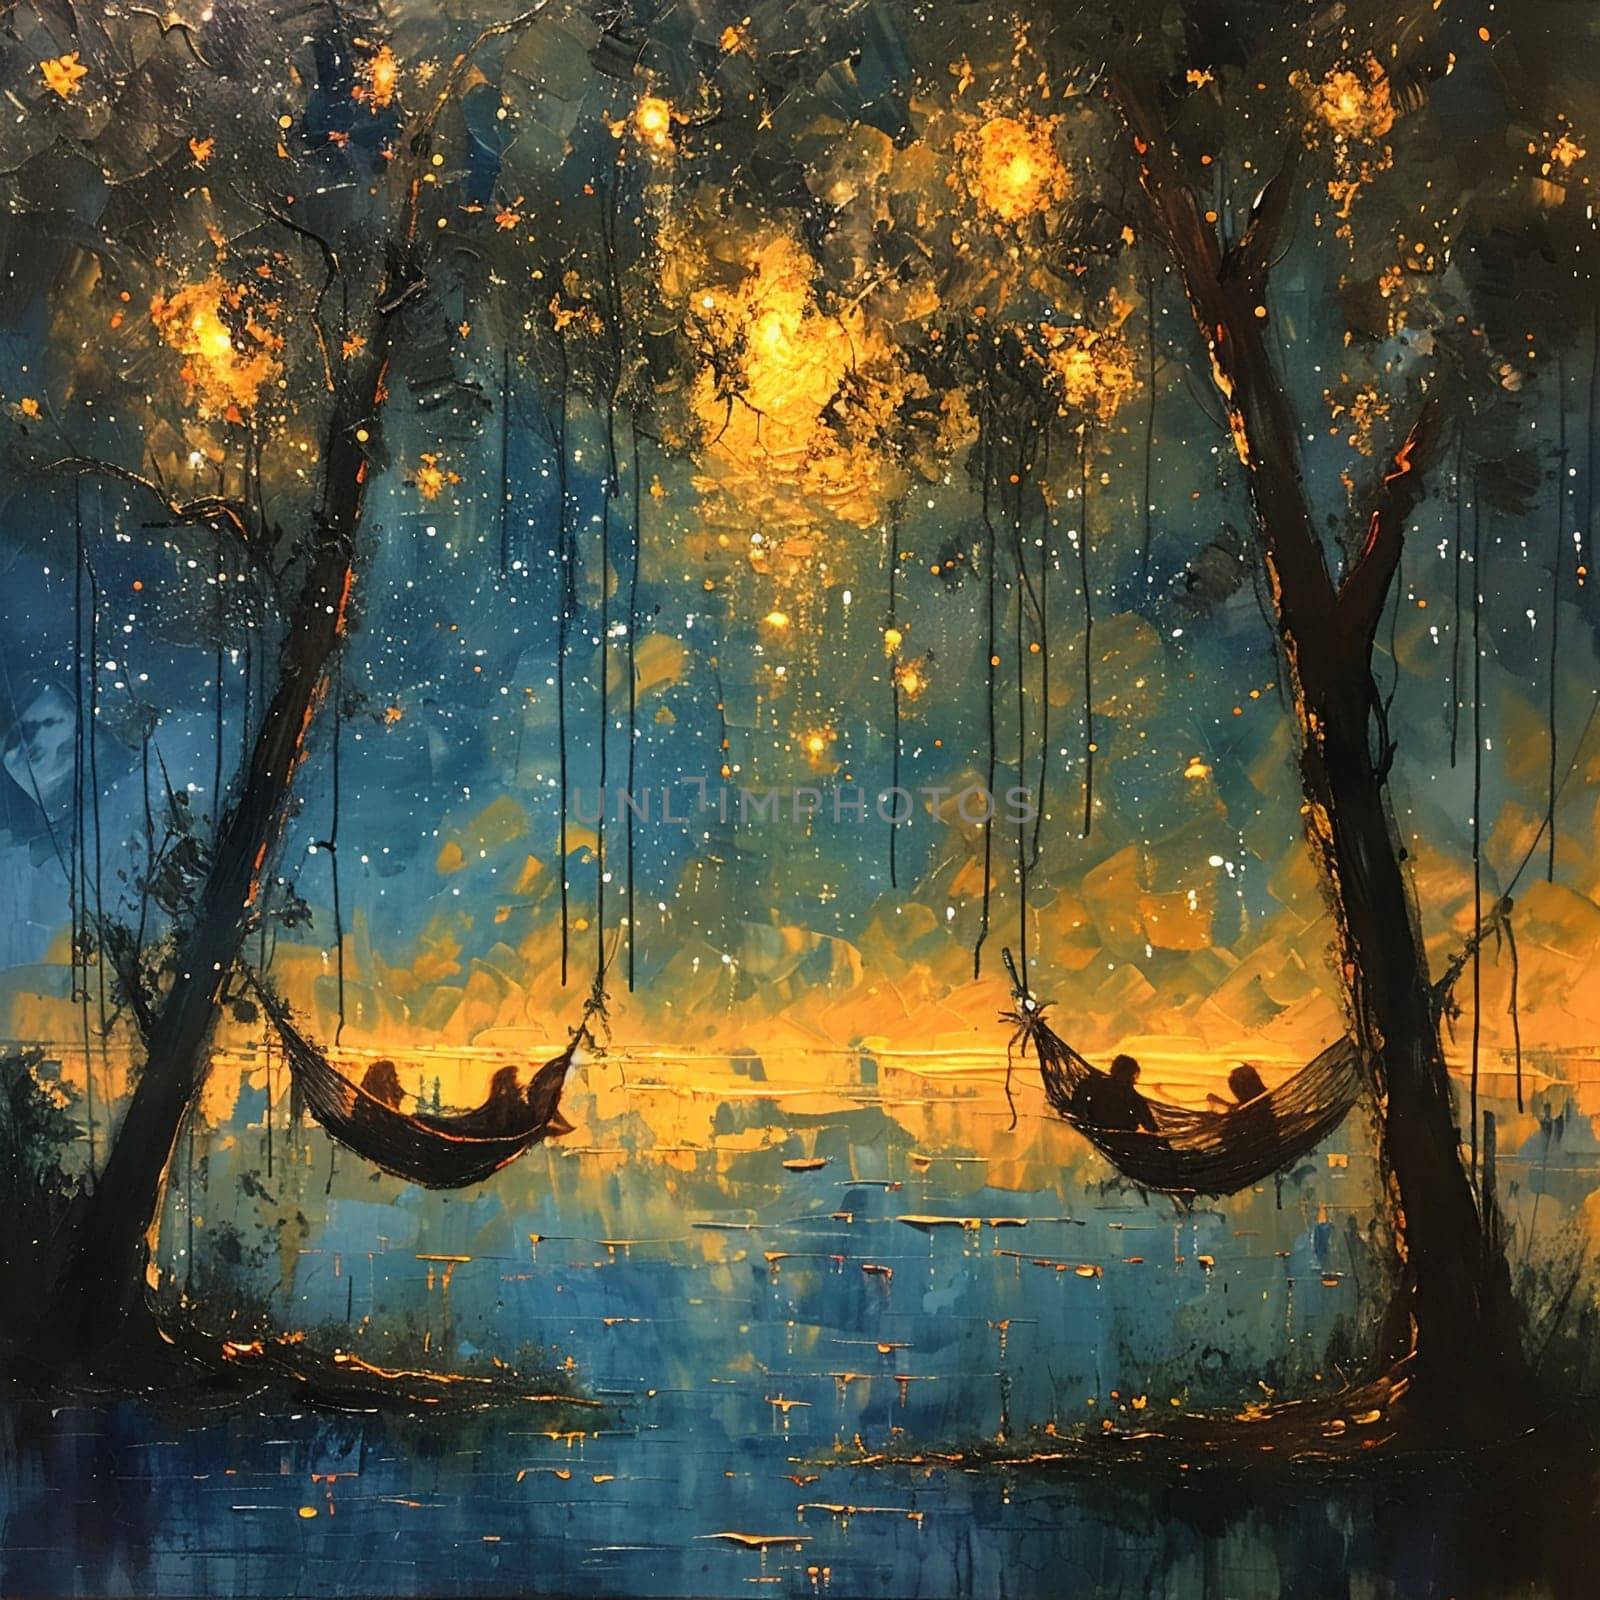 Oil painting capturing tranquility of World Sleep Day with people resting in hammocks under starry sky.